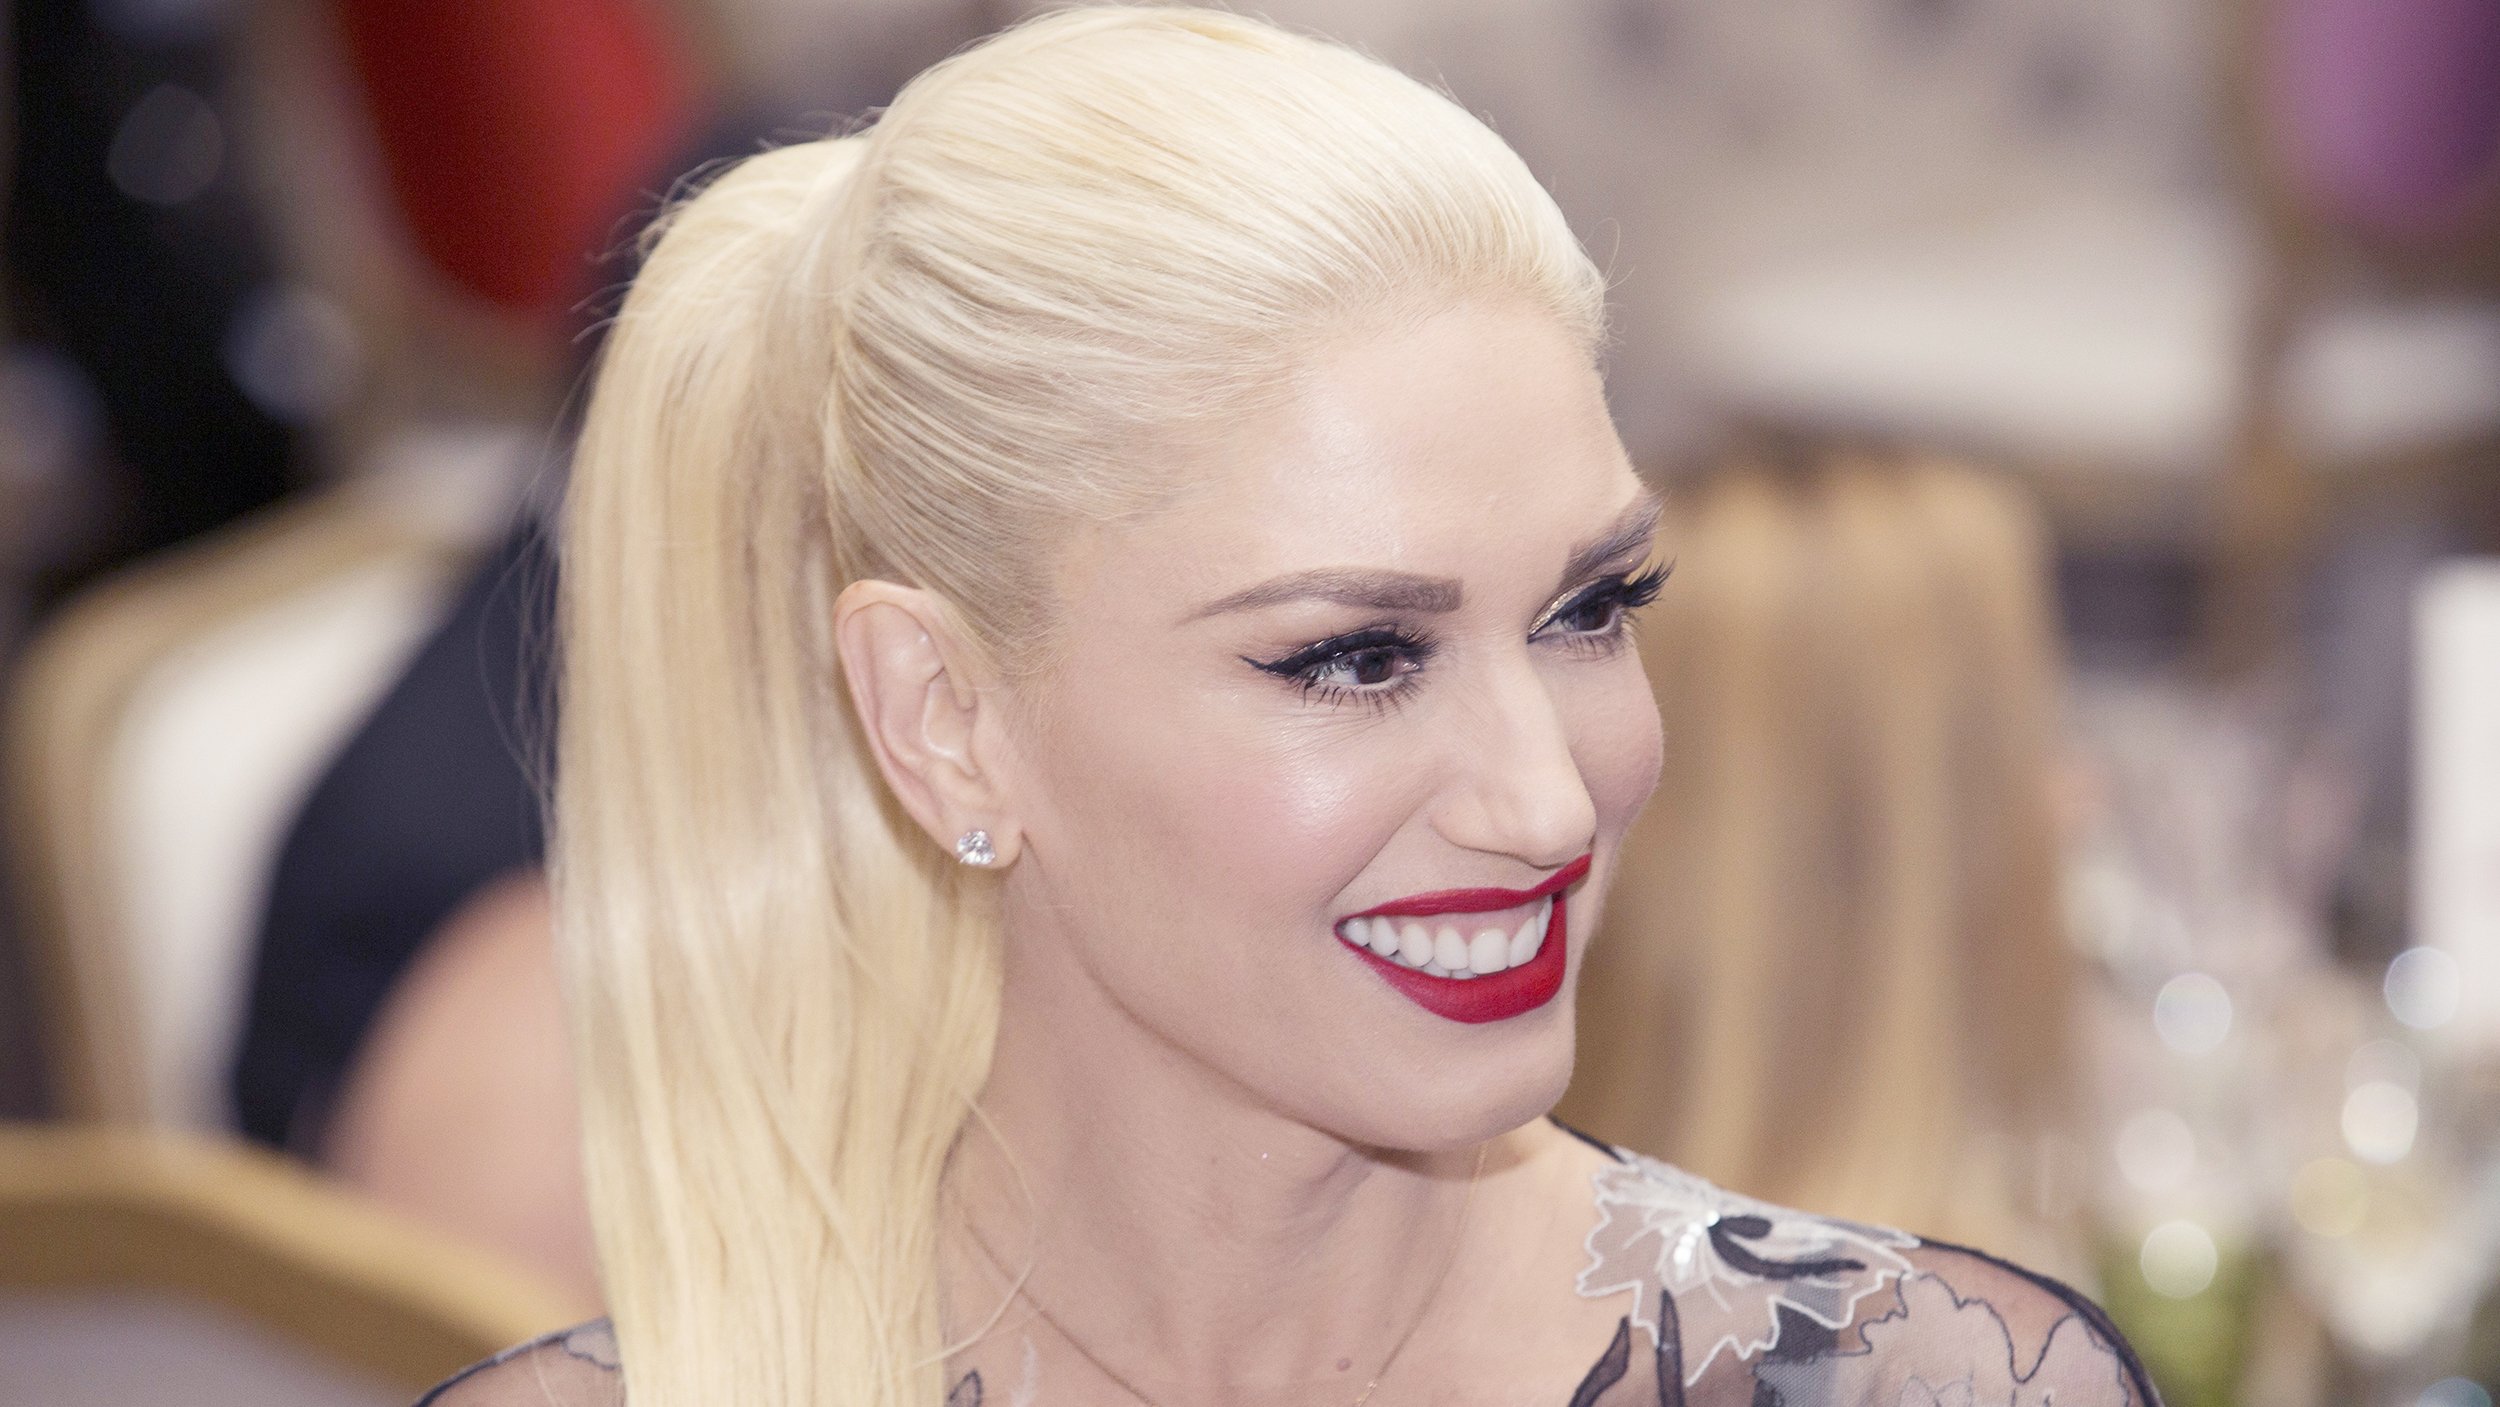 WASHINGTON, DC - OCTOBER 18: U.S. entertainer Gwen Stefani attends a state dinner for Italian Prime Minister Matteo Renzi, hosted by President Barack Obama on the South Lawn of the White House October 18, 2016 in Washington DC. The president and first lady Michelle Obama will tonight host their final state dinner, with singer Gwen Stefani performing. (Photo by Michael Reynolds-Pool/Getty Images)